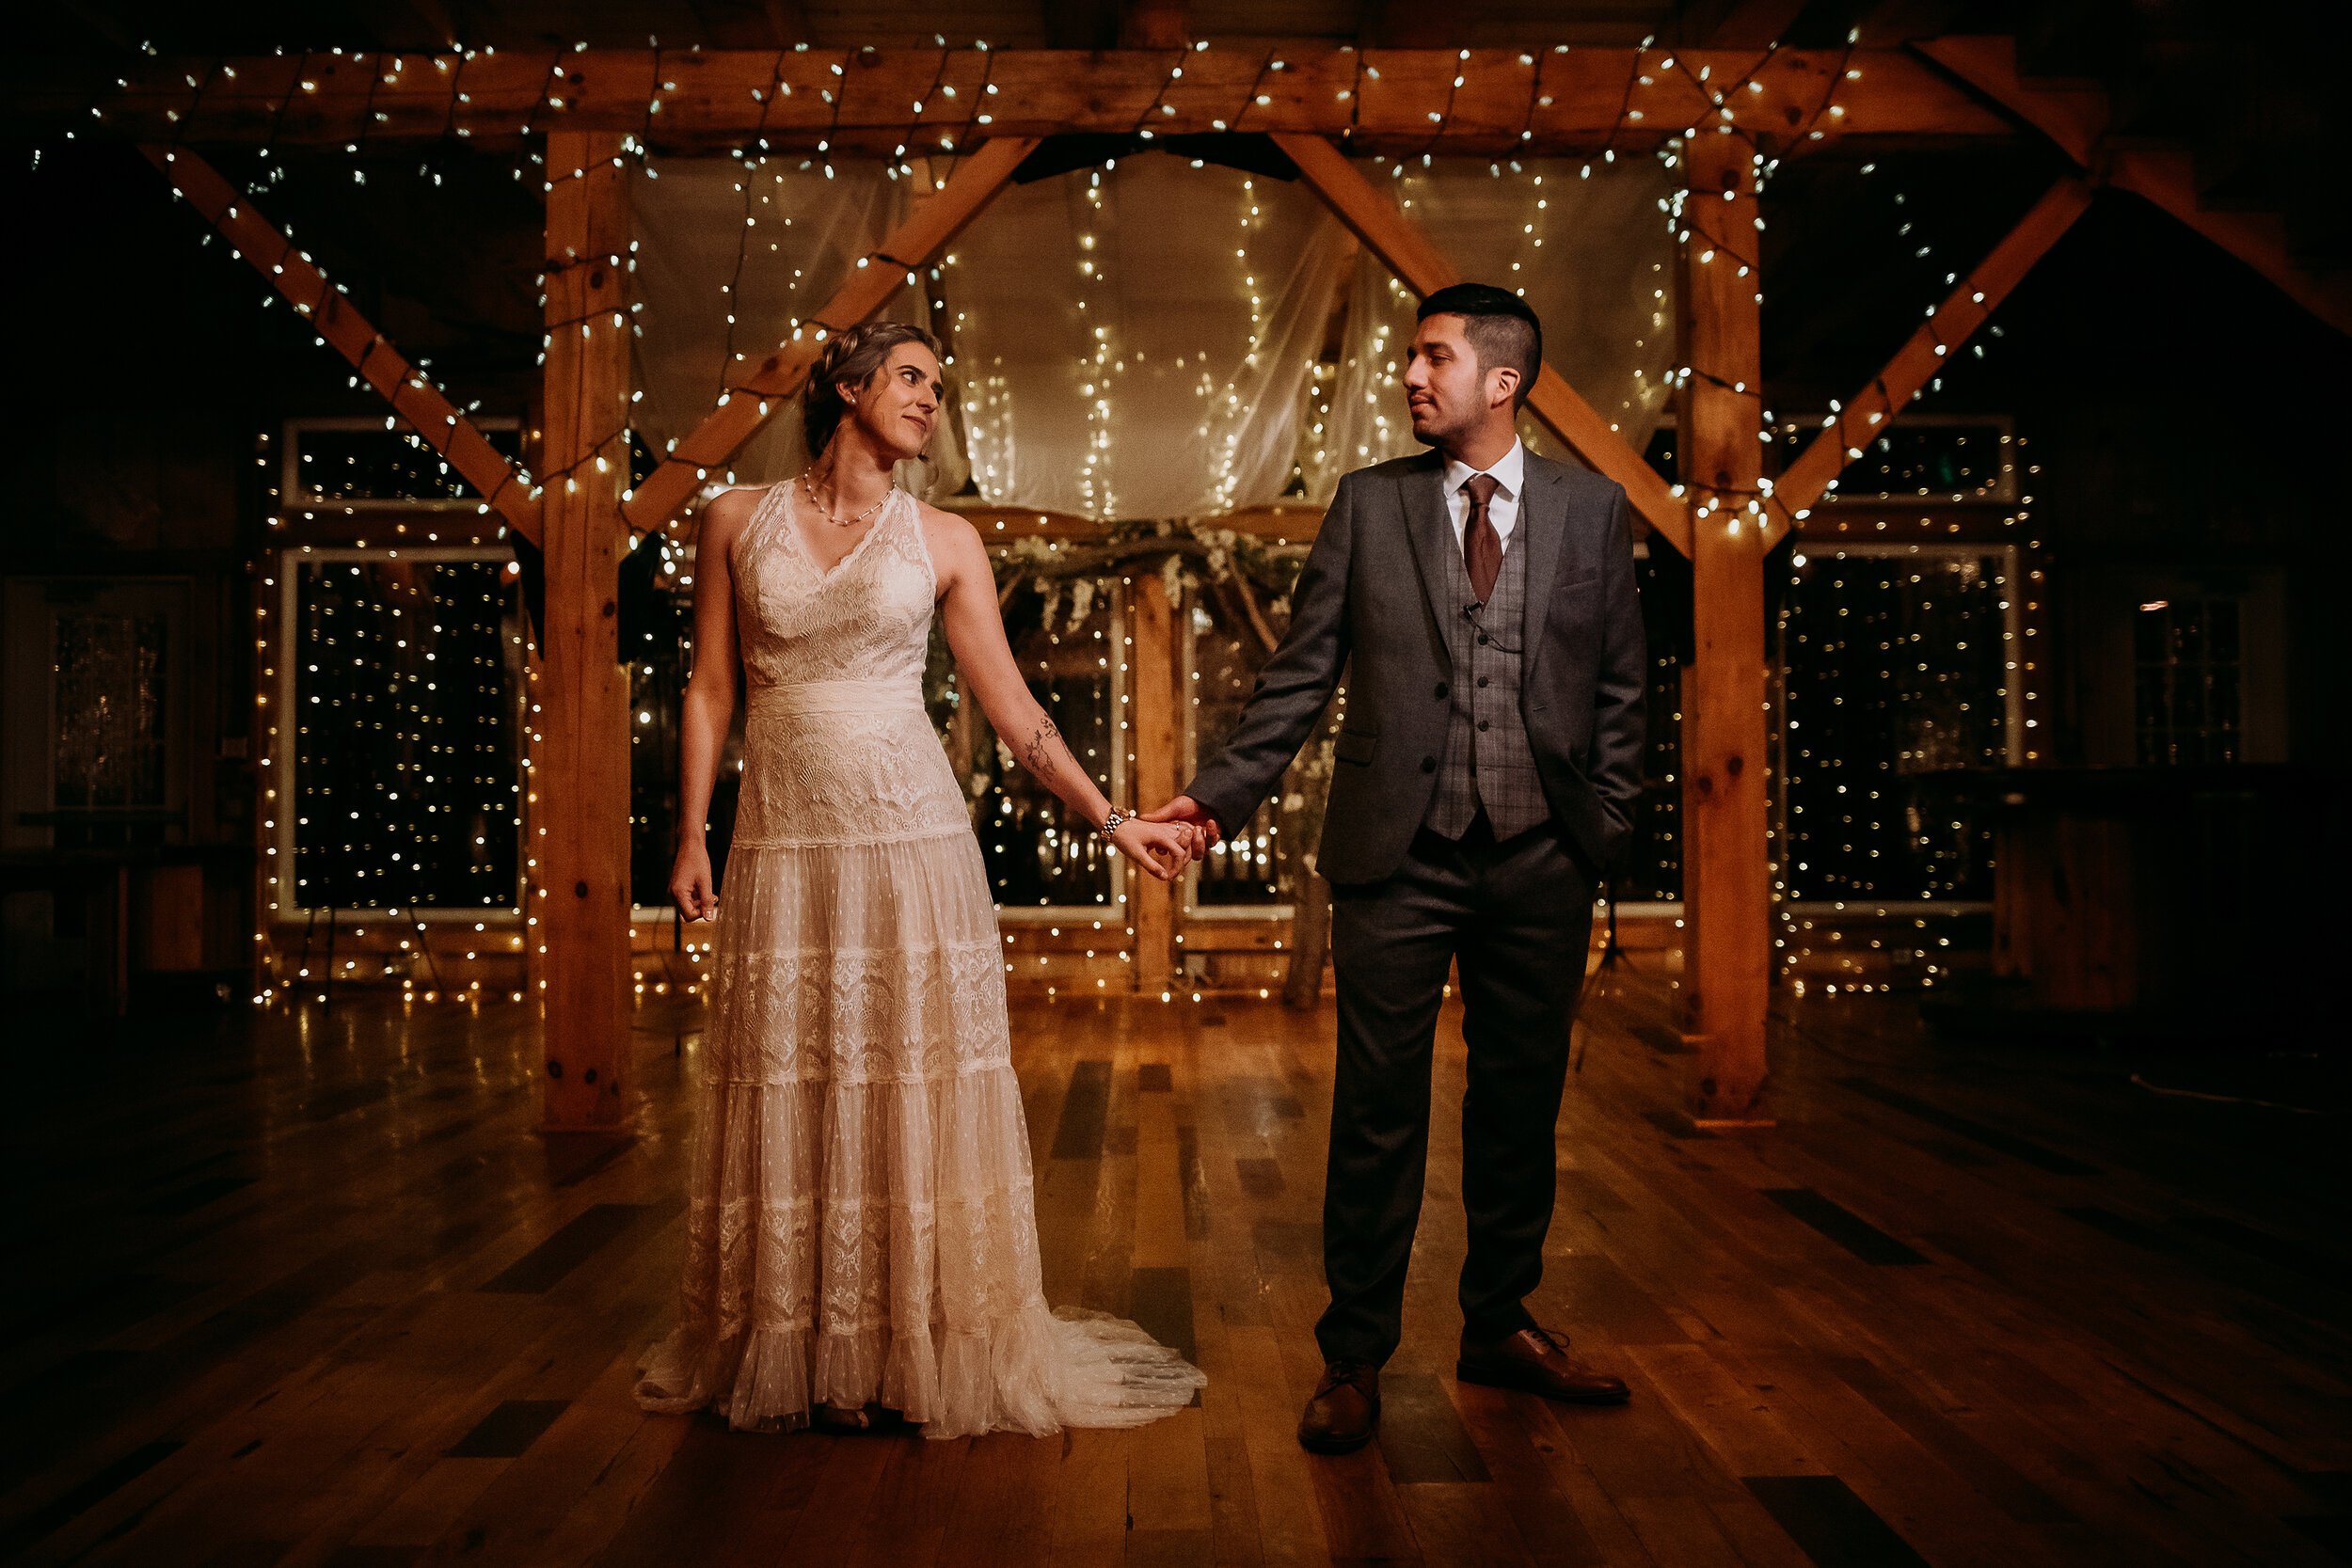  Kindred + Co. Photography captures romantic fairytale dancing following intimate evening treehouse elopement in Northeastern, Ohio. treehouse string lights, floral wooden wedding arch, bohemian wedding lace dress, braided bohemian wedding updo, hold